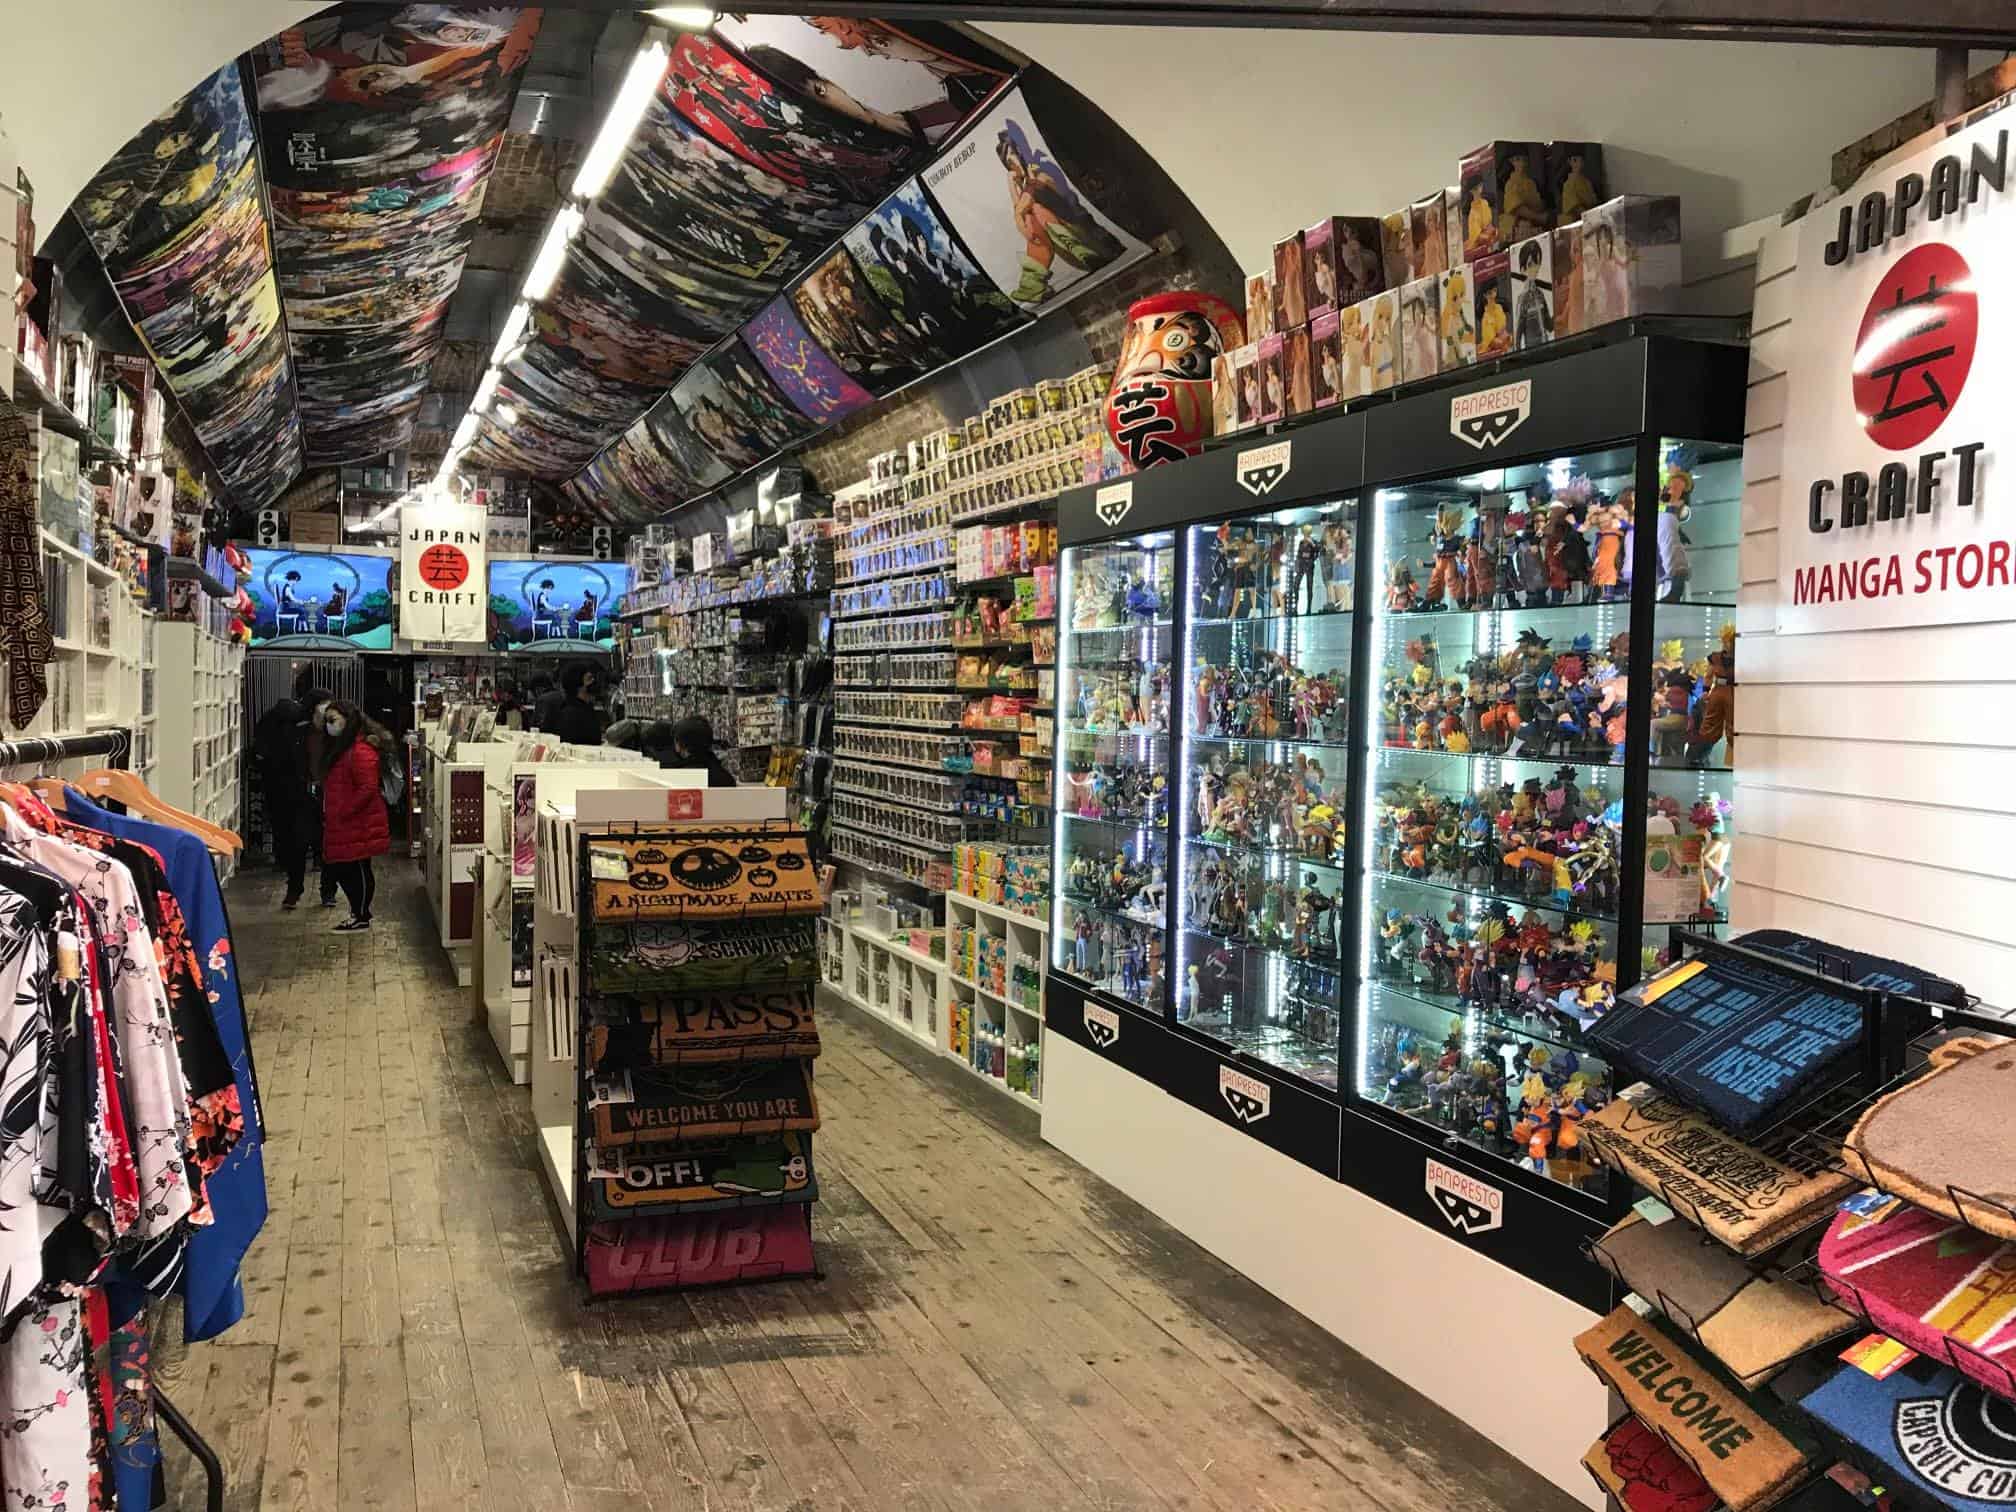 10 Best Anime Shops To Buy Manga In London - Winterville